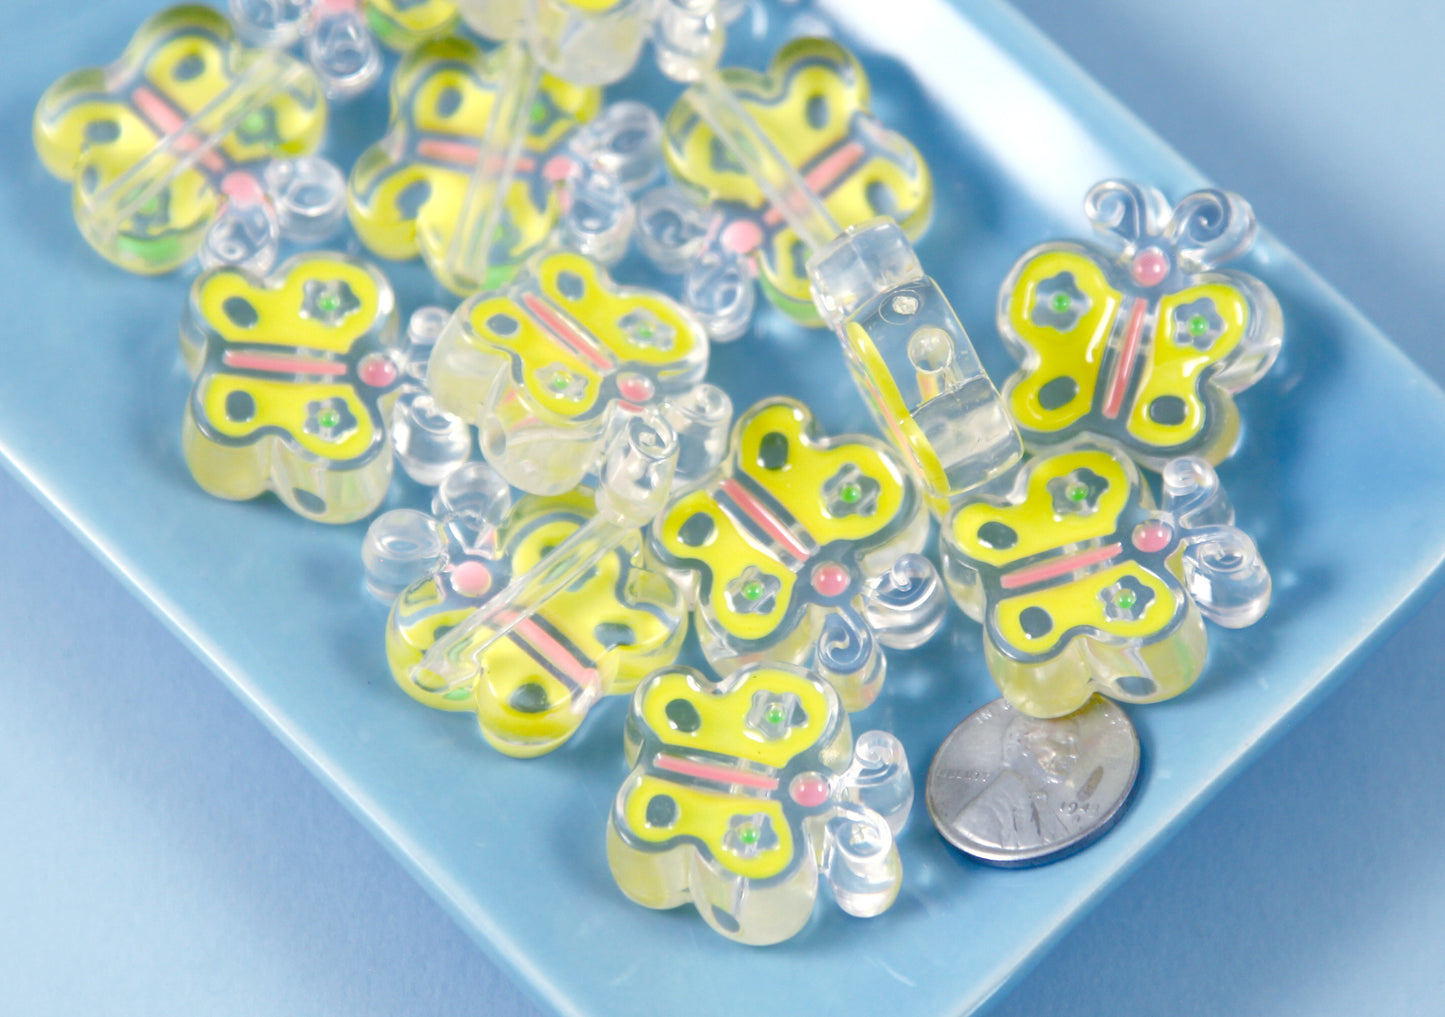 Butterfly Beads - 25mm Yellow Butterfly Enamel Style Acrylic Beads or Resin Beads - 10 pc set